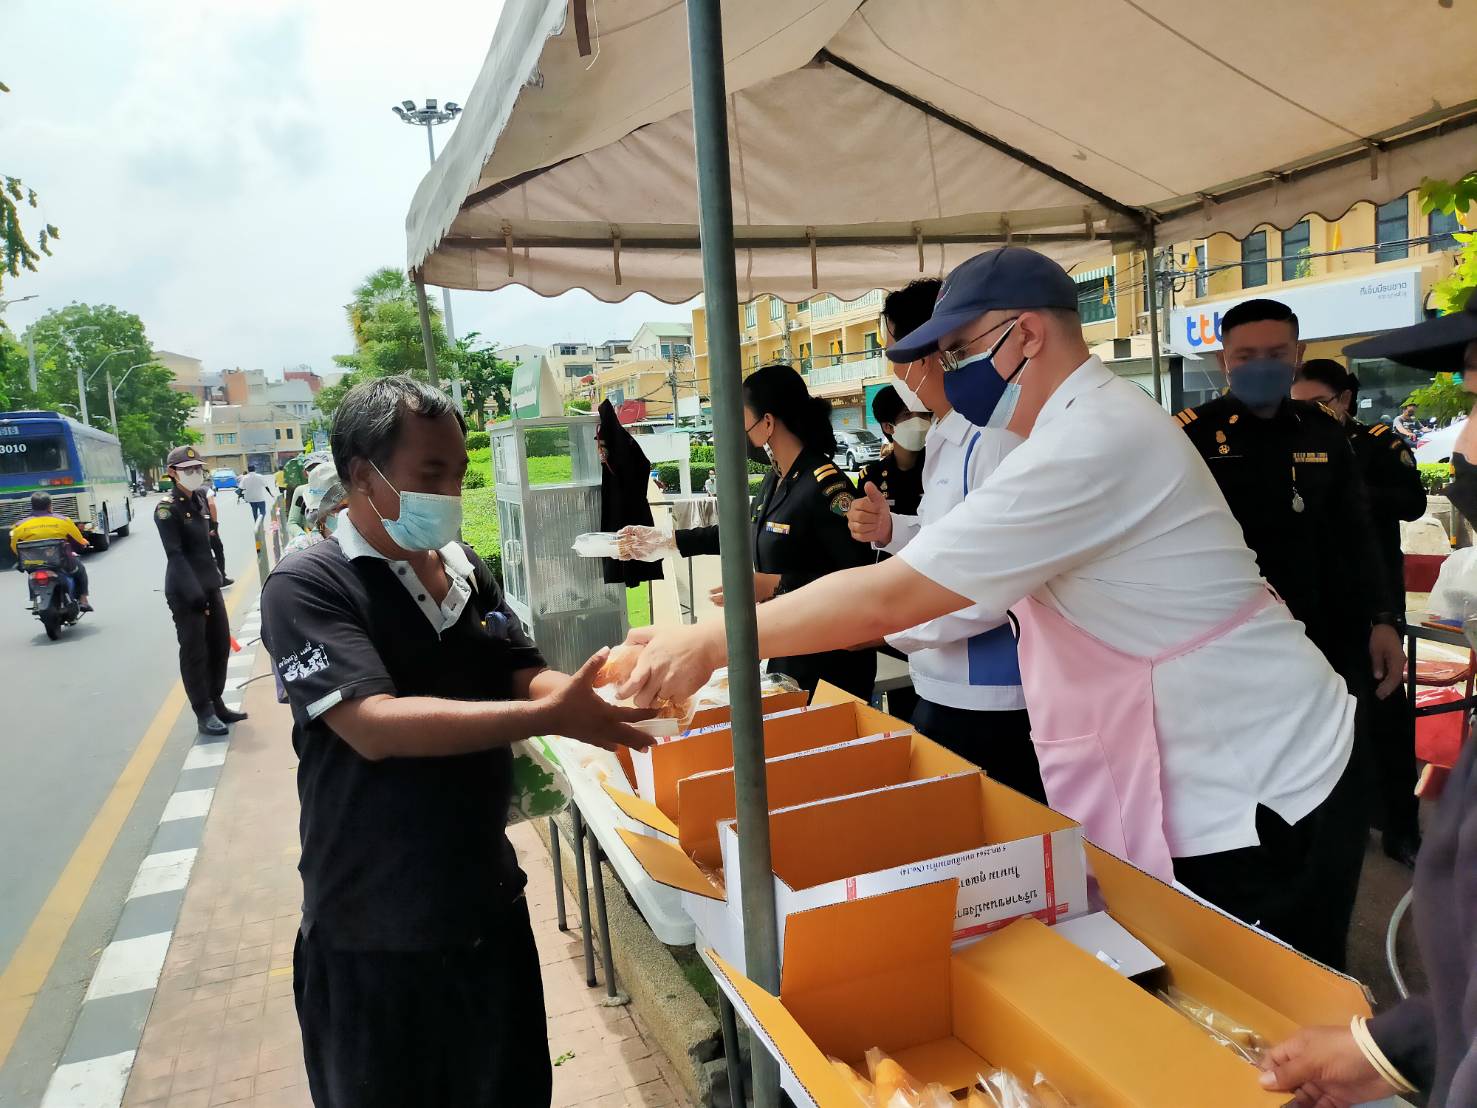 On  5 October  2021, Mr. Christopher Benjakul, APCD Public Relations Officer, presented box sets (freshly baked pastries and beverages) to homeless people who live on Ratchadamnoen Avenue.